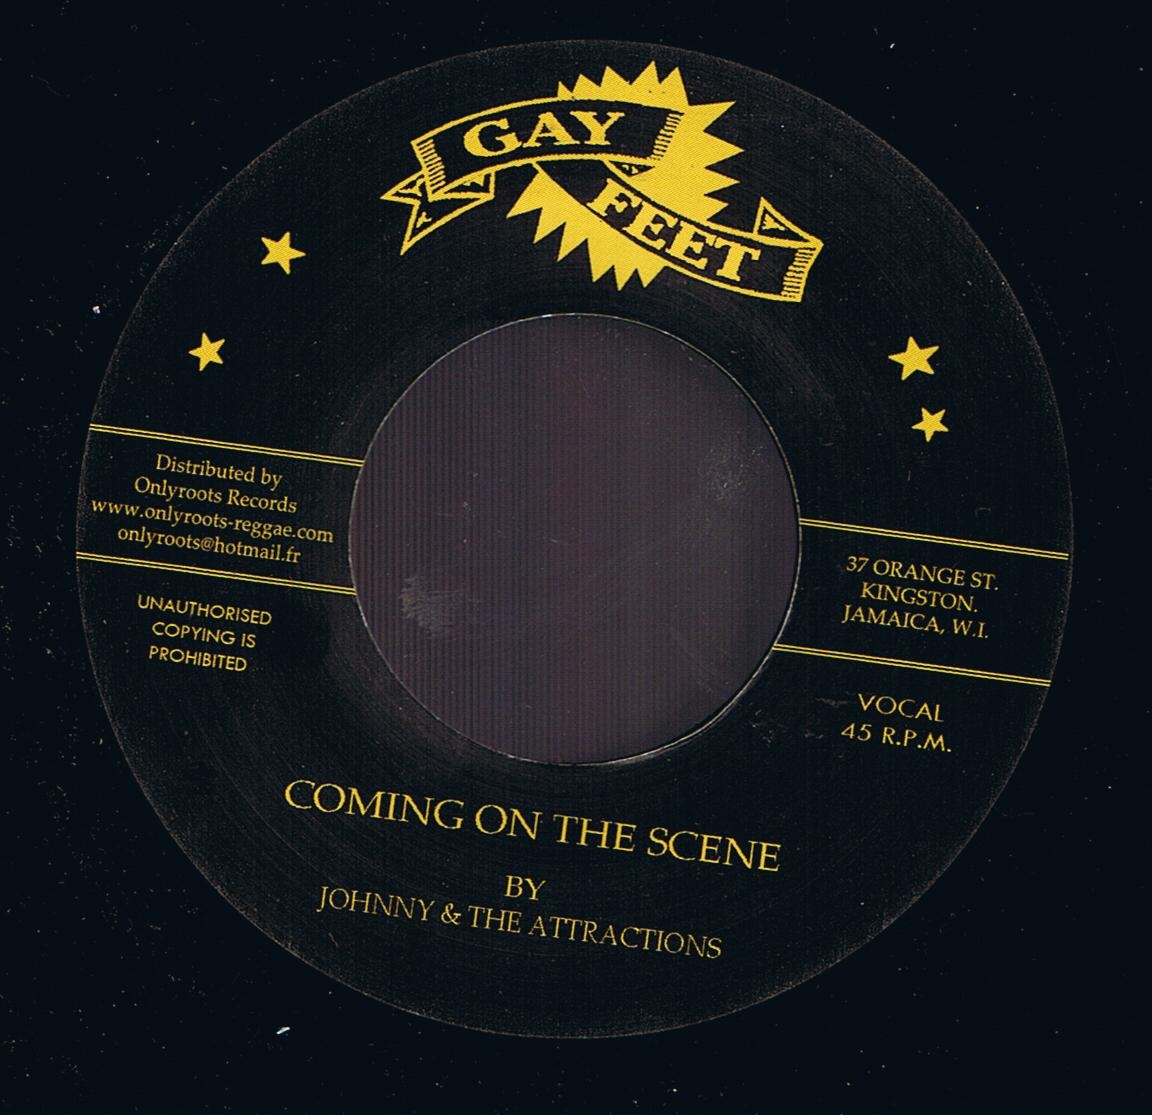 Johnny & The Attractions - Coming On The Scene / Johnny & The Attractions - Call Of The Drums (7")